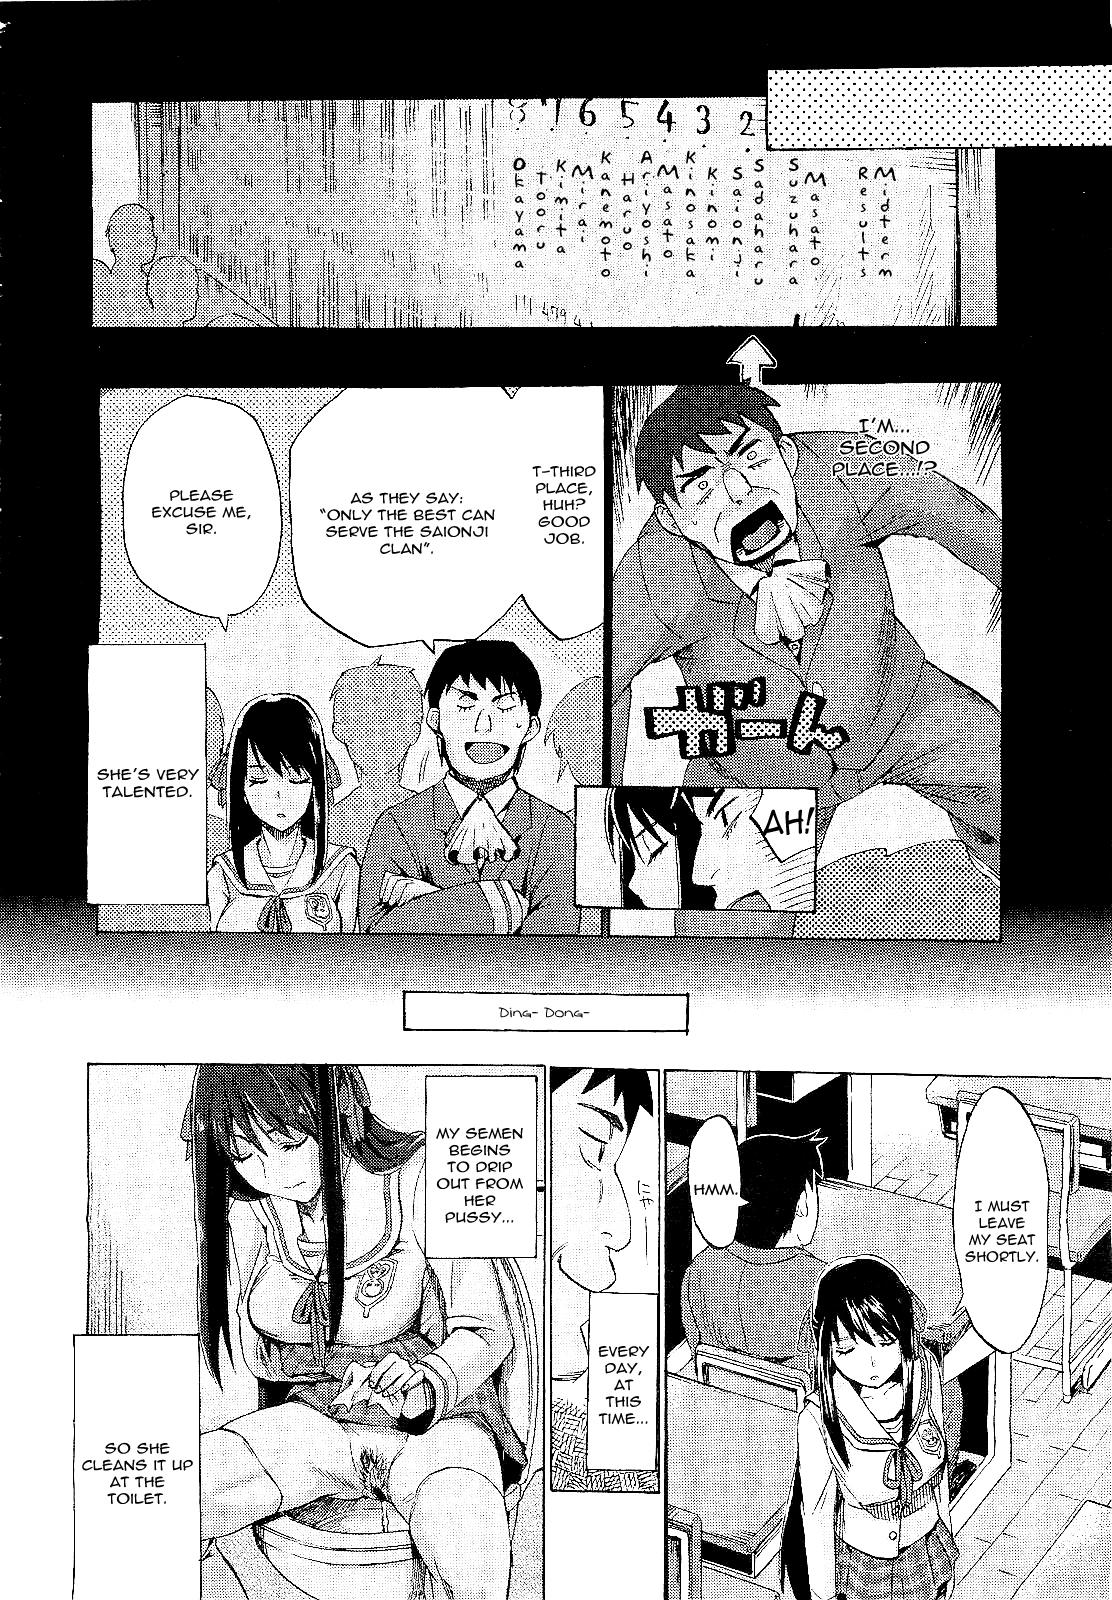 Asian Babes Kimi wa Meido de Shika Nai | You Are Just A Maid Ch. 1-3 Passion - Page 8